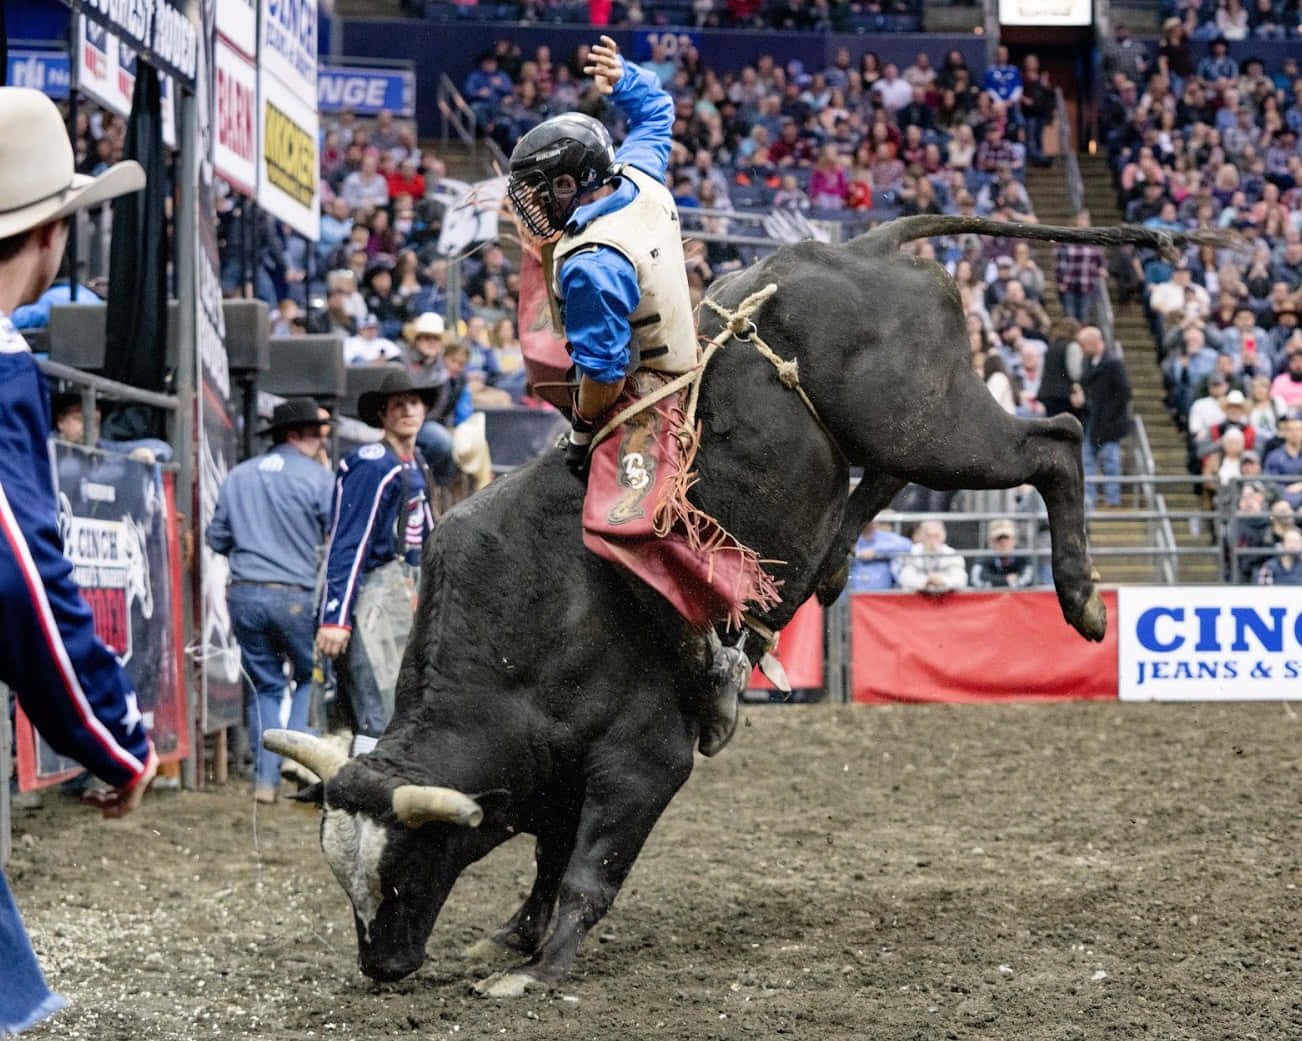 Brave Cowboys Showcase Their Skills In Bull Riding Competitions